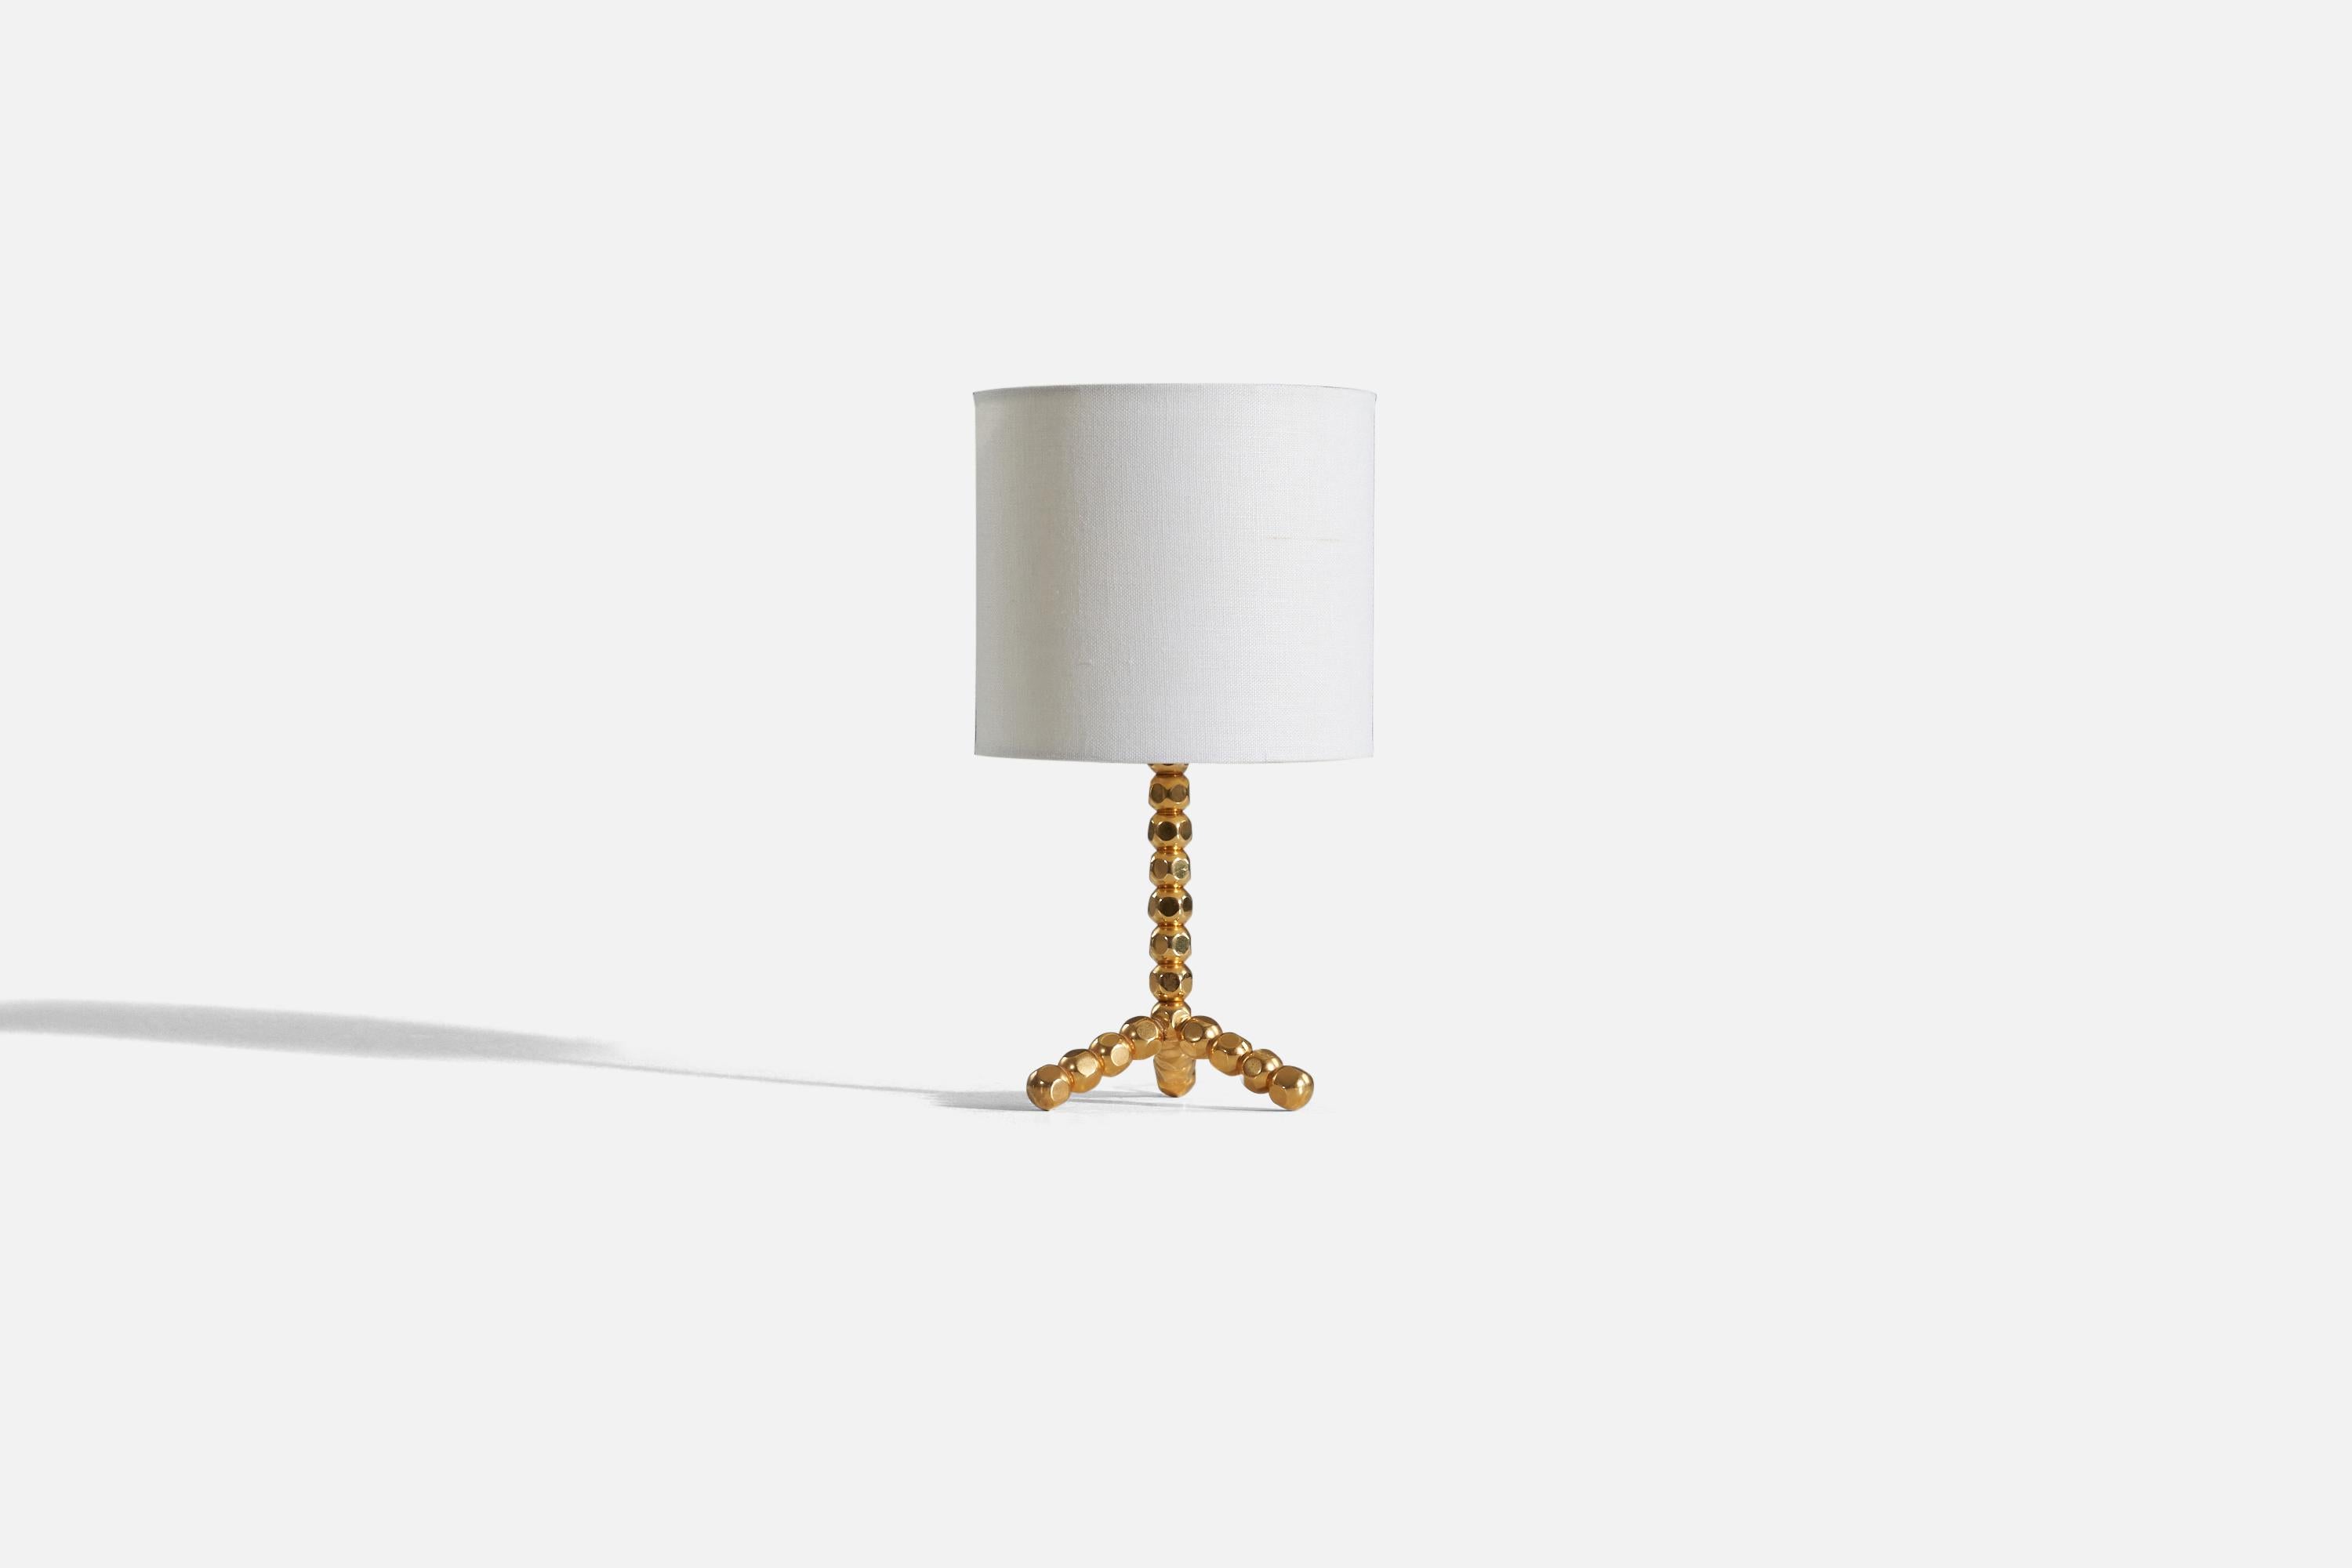 A brass table lamp designed and produced by a Swedish designer, Sweden, c.1960 - 1970s.

Sold without lampshade. 
Dimensions of lamp (inches) : 7.75 x 4.3125 x 4.5 (H x W x D)
Dimensions shade (inches) : 6 x 6 x 5.5 (T x B x H)
Dimension of